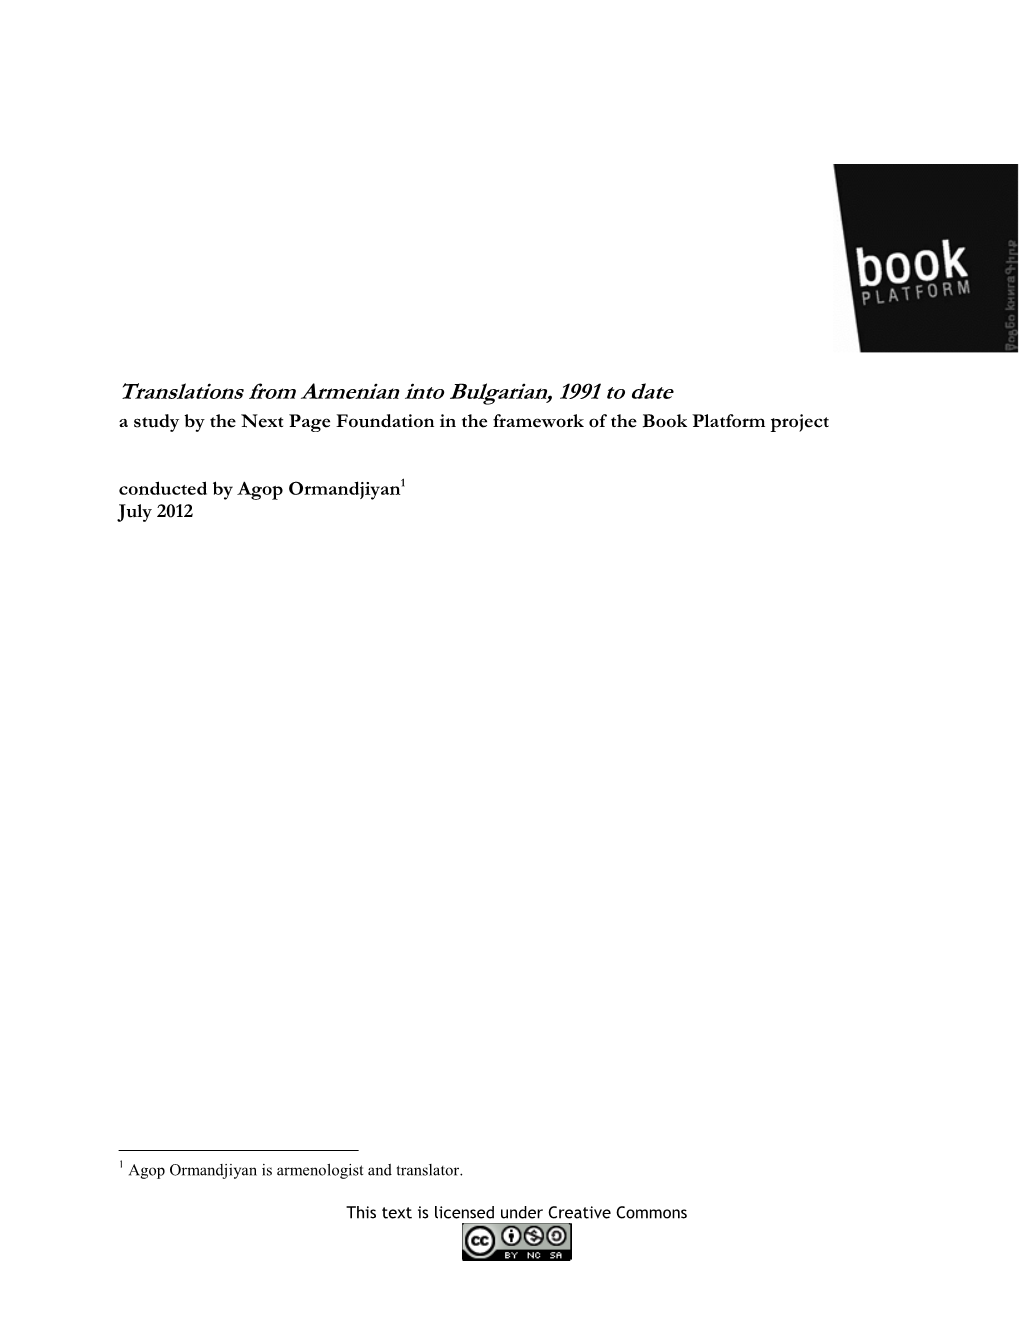 Translations from Armenian Into Bulgarian, 1991 to Date a Study by the Next Page Foundation in the Framework of the Book Platform Project